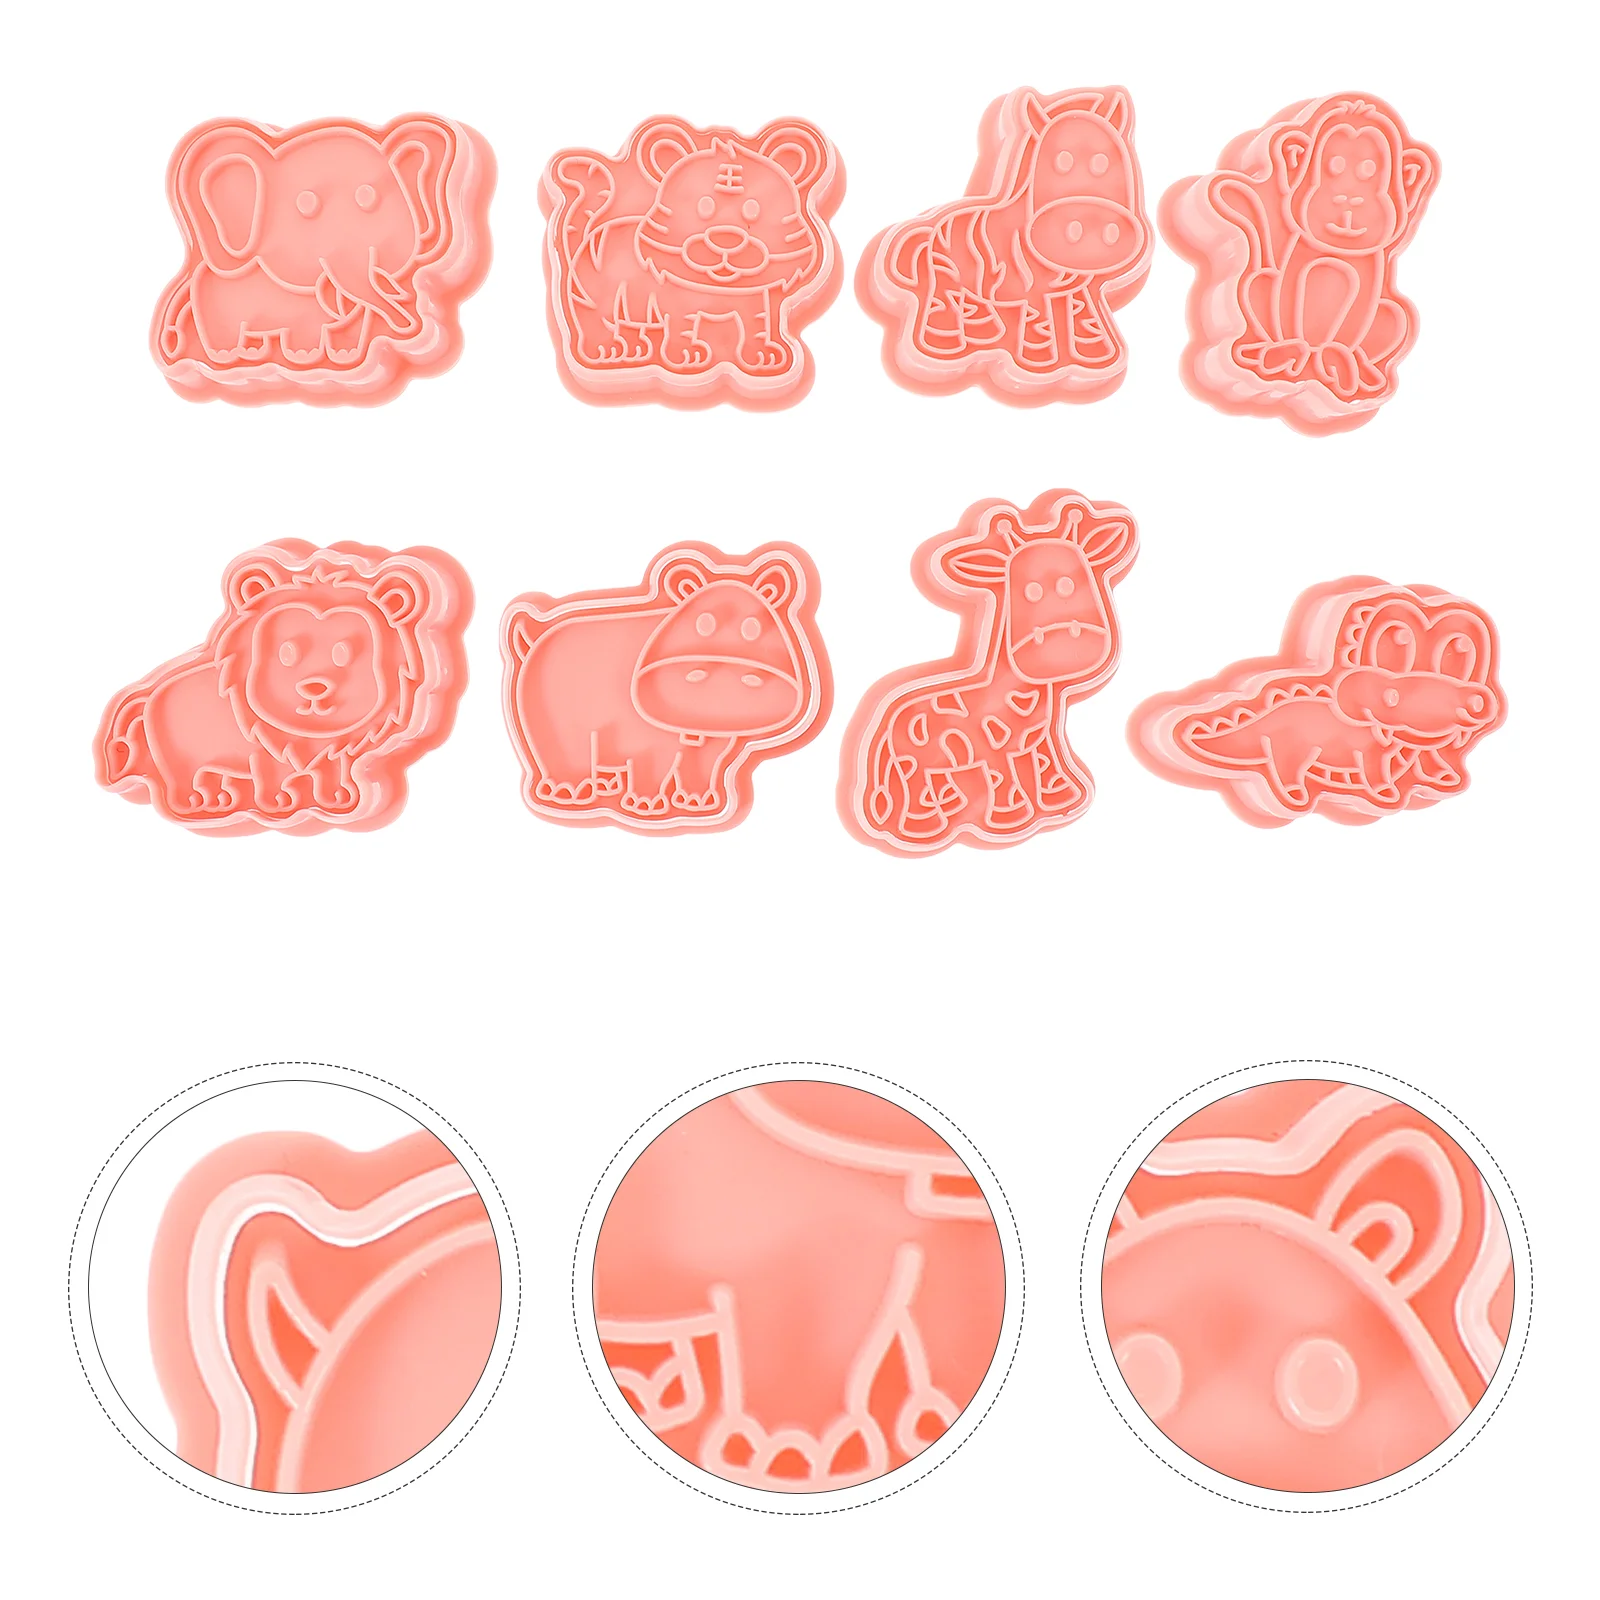 

Cookie Mold Animal Cookie Stamp Party Cookie Baking Mold Tool 3D Biscuit Mold Baked Sugar Flipping Animal Crackers